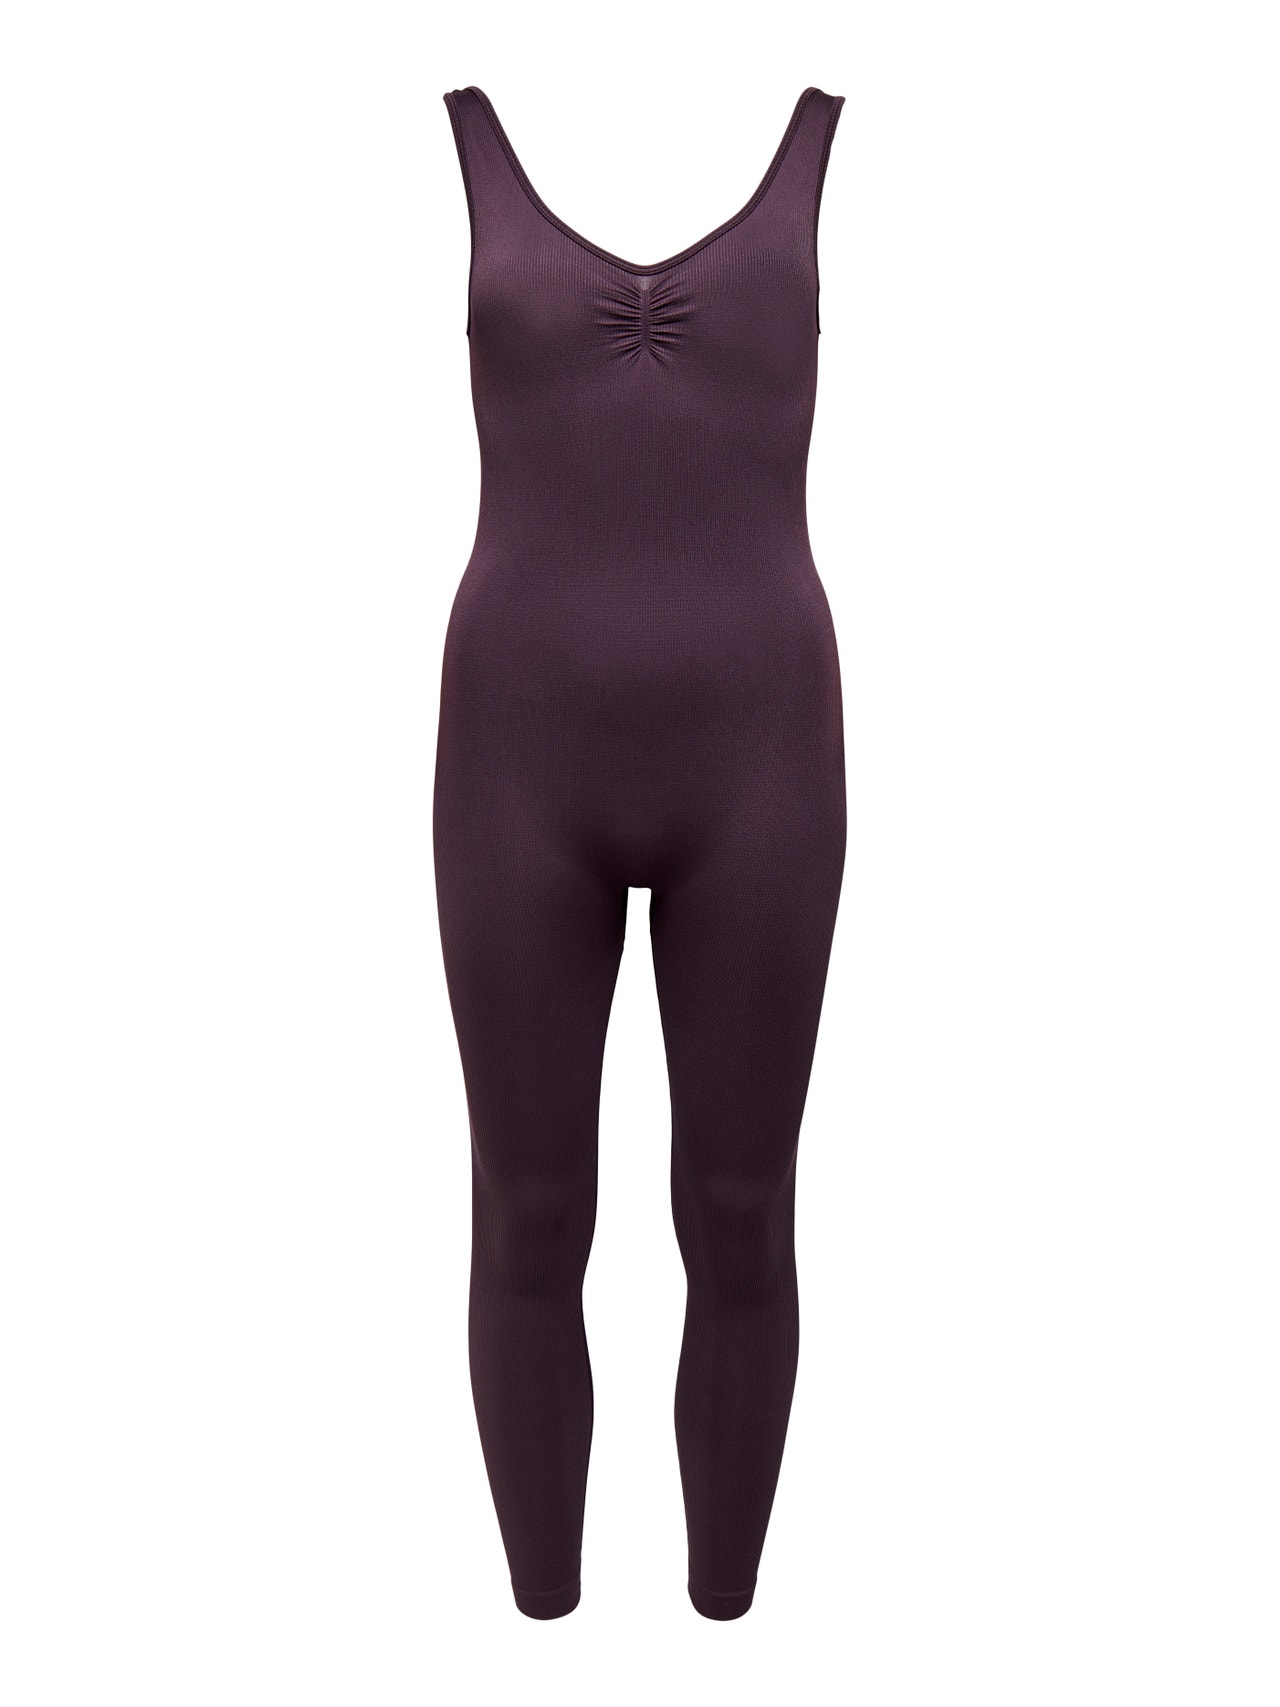 ONLY Jumpsuit -Plum Perfect - 15274890